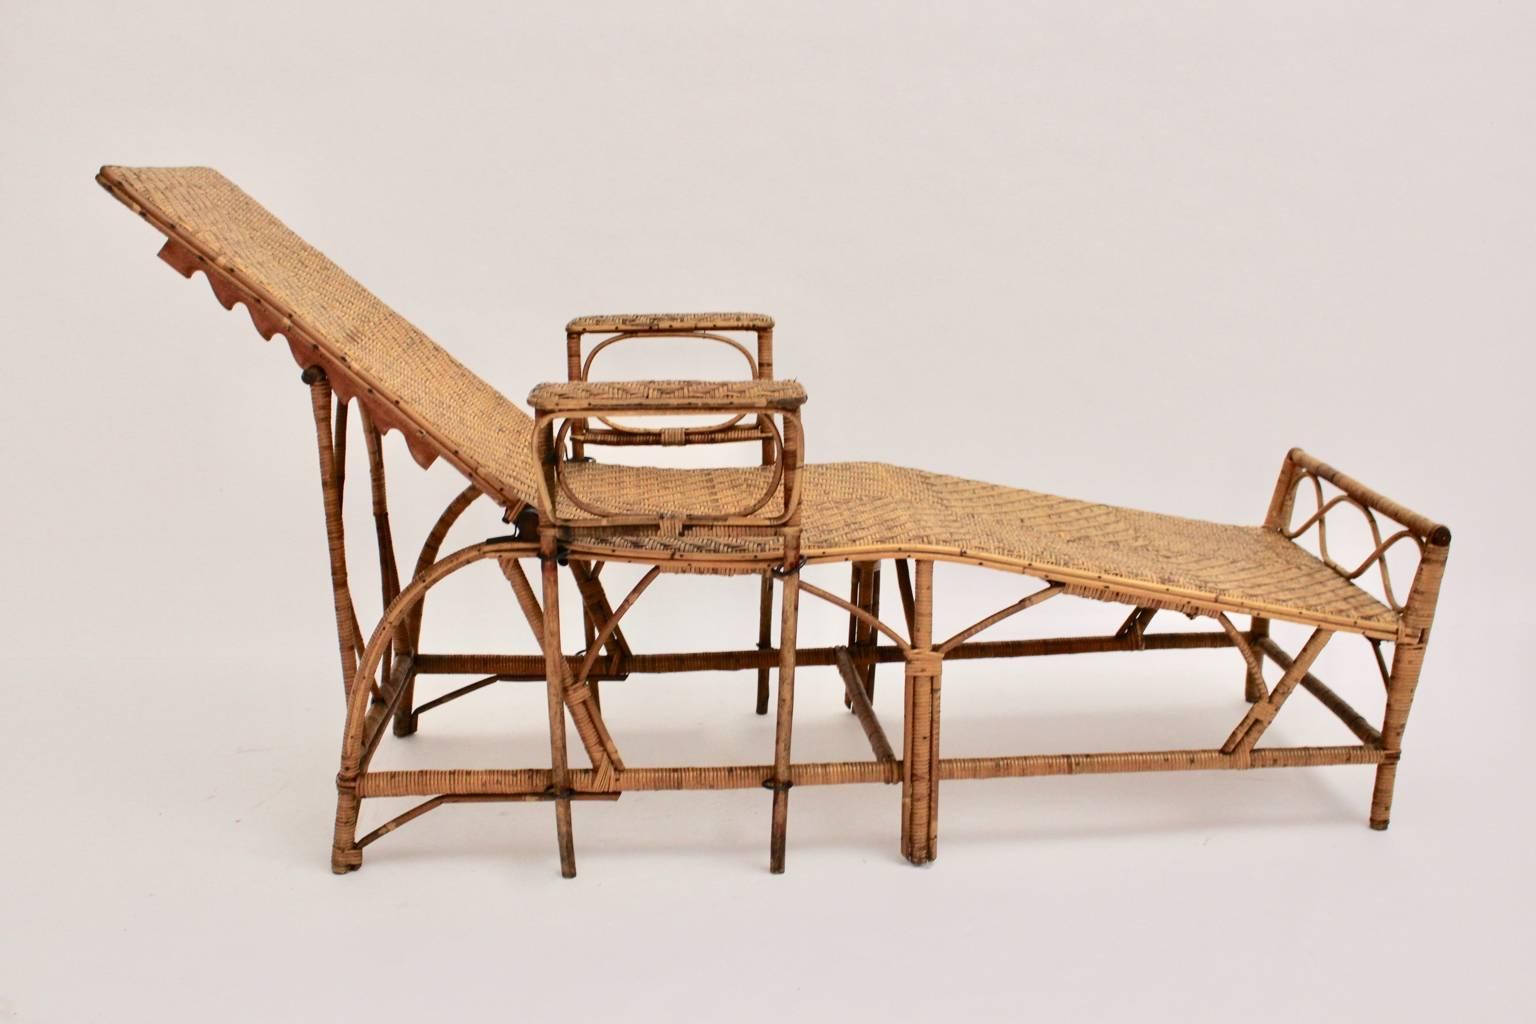 Rattan Art Deco vintage chaise longue or daybed, which was created by Perret & Vibert attributed, France, 1920s.

This rare and elegant chaise longue features an adjustable back (from 152 cm to 192 cm) and an adjustable height from 70 cm to 90